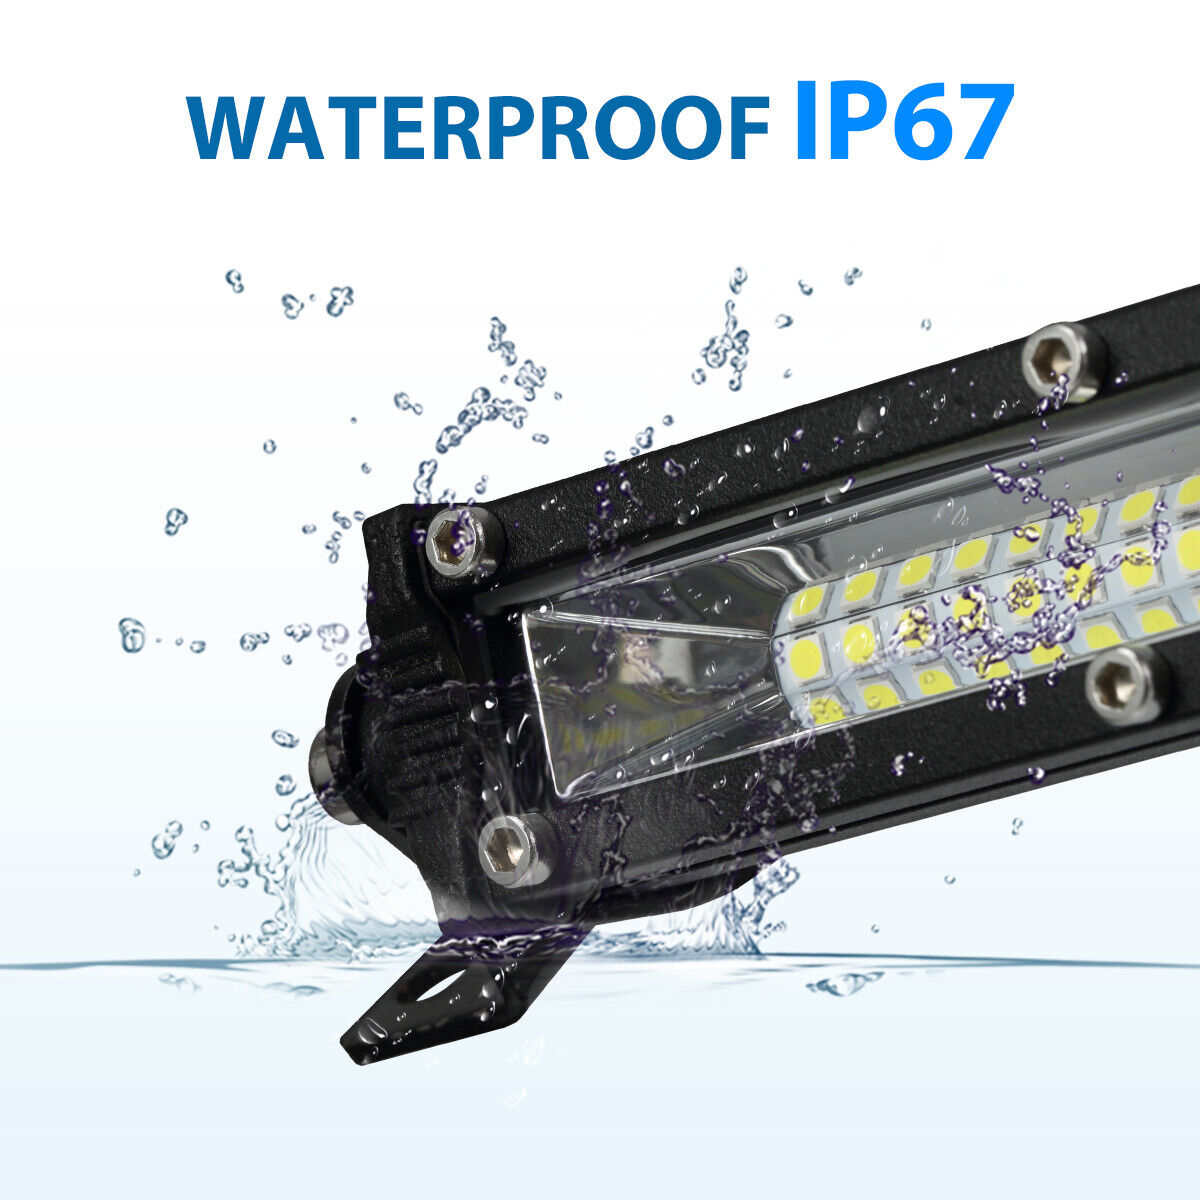 2x 12" inch 450W LED Work Light Bar Combo Spot Flood Driving Off Road SUV Boat Unbranded Does Not Apply - фотография #6